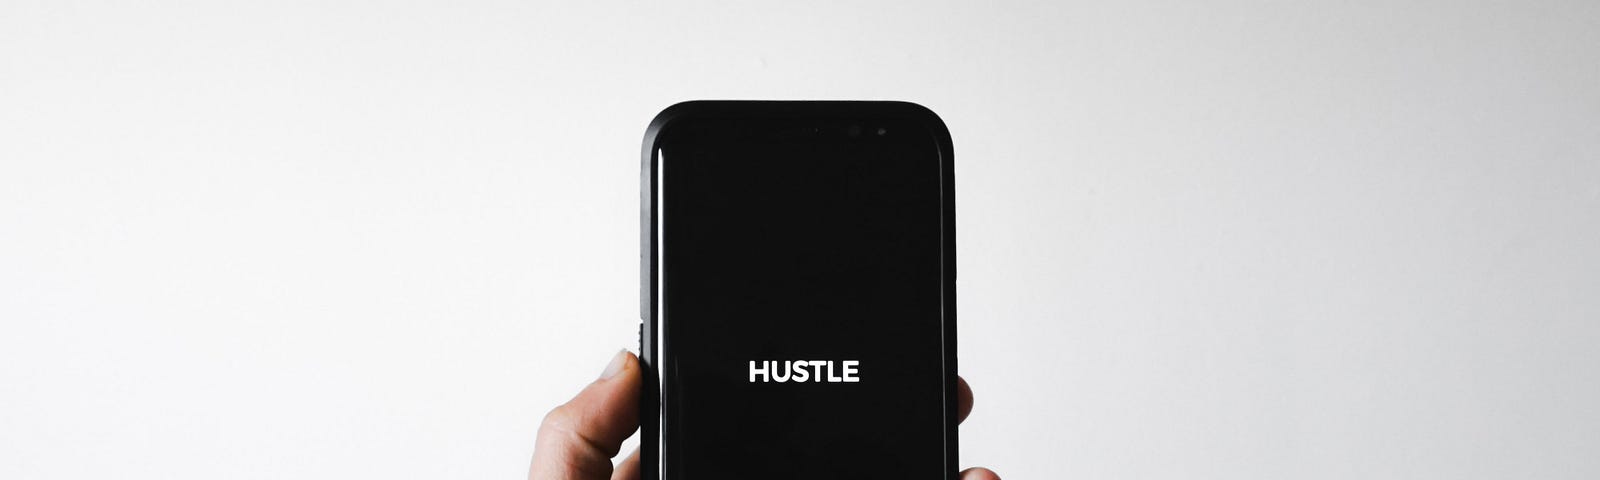 Smartphone displaying the word Hustle on a black screen.